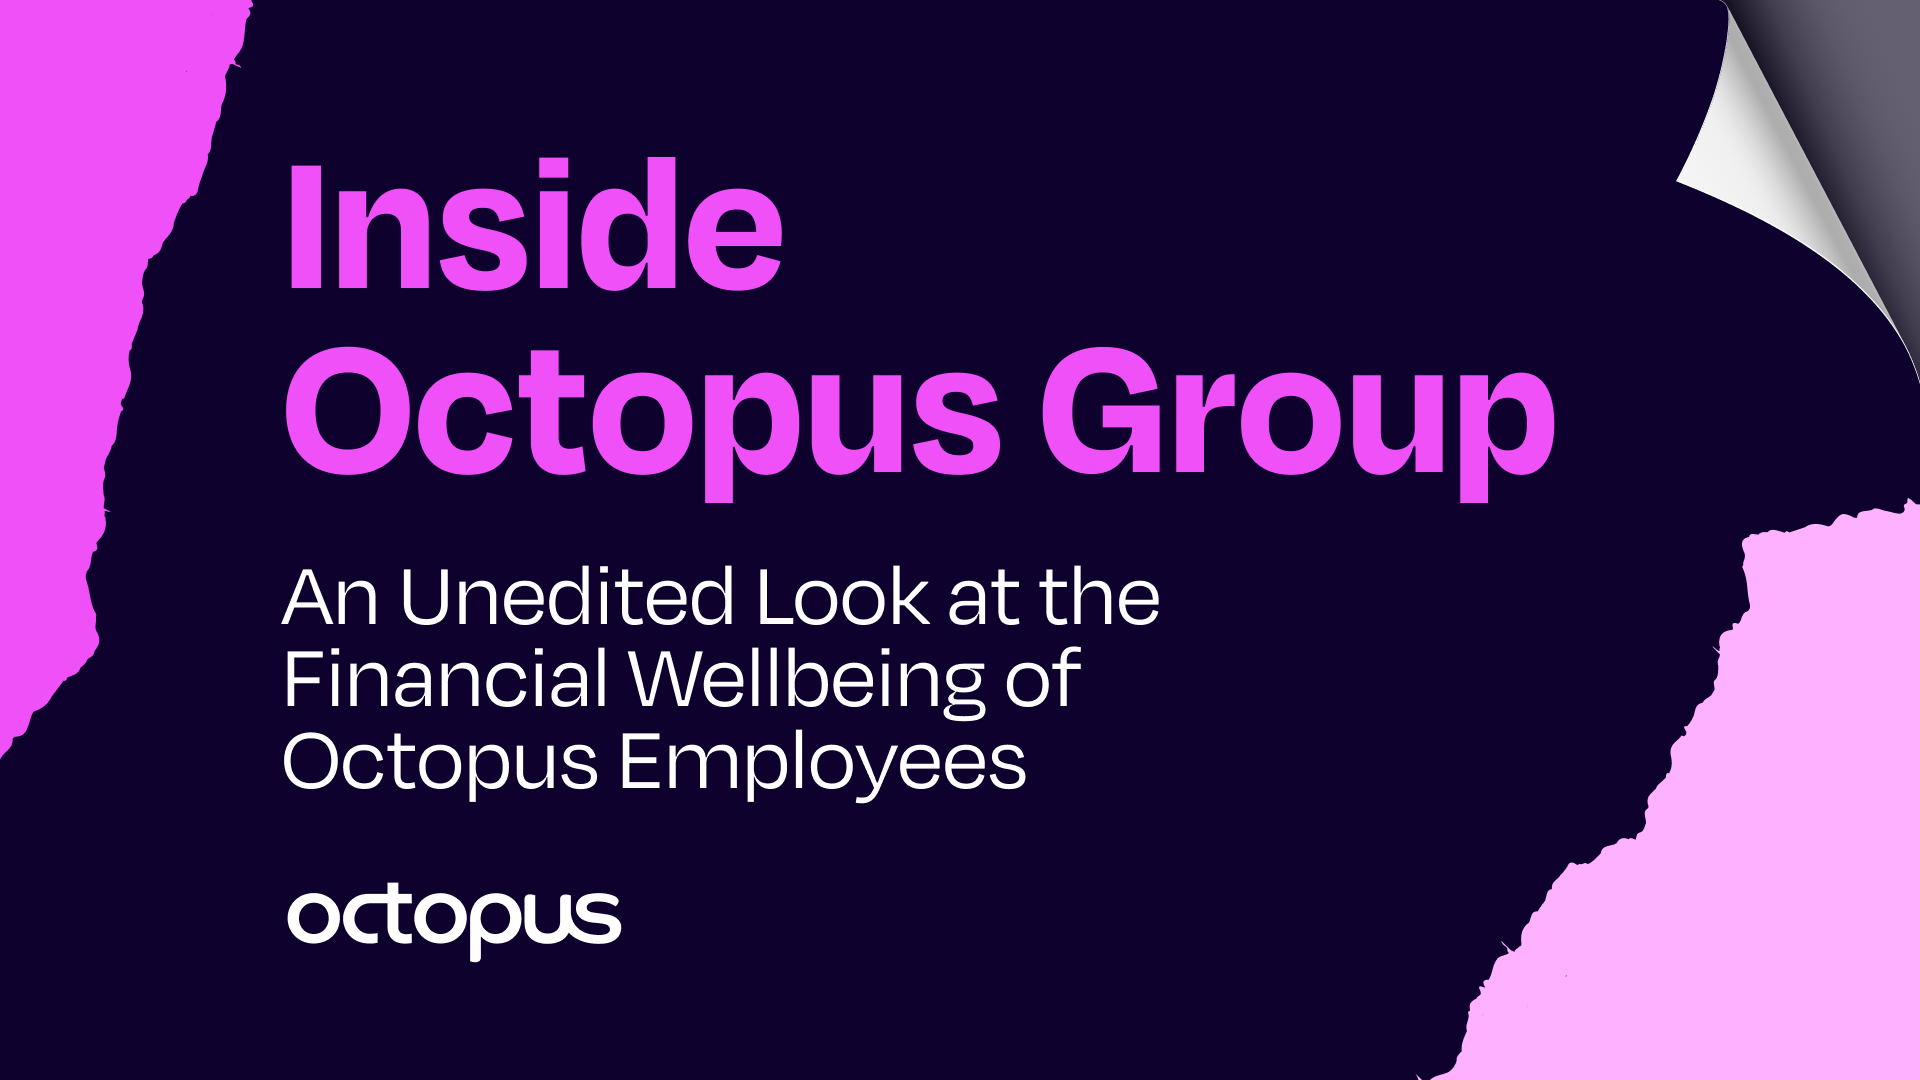 An unedited, inside look at employee financial wellbeing at Octopus Group